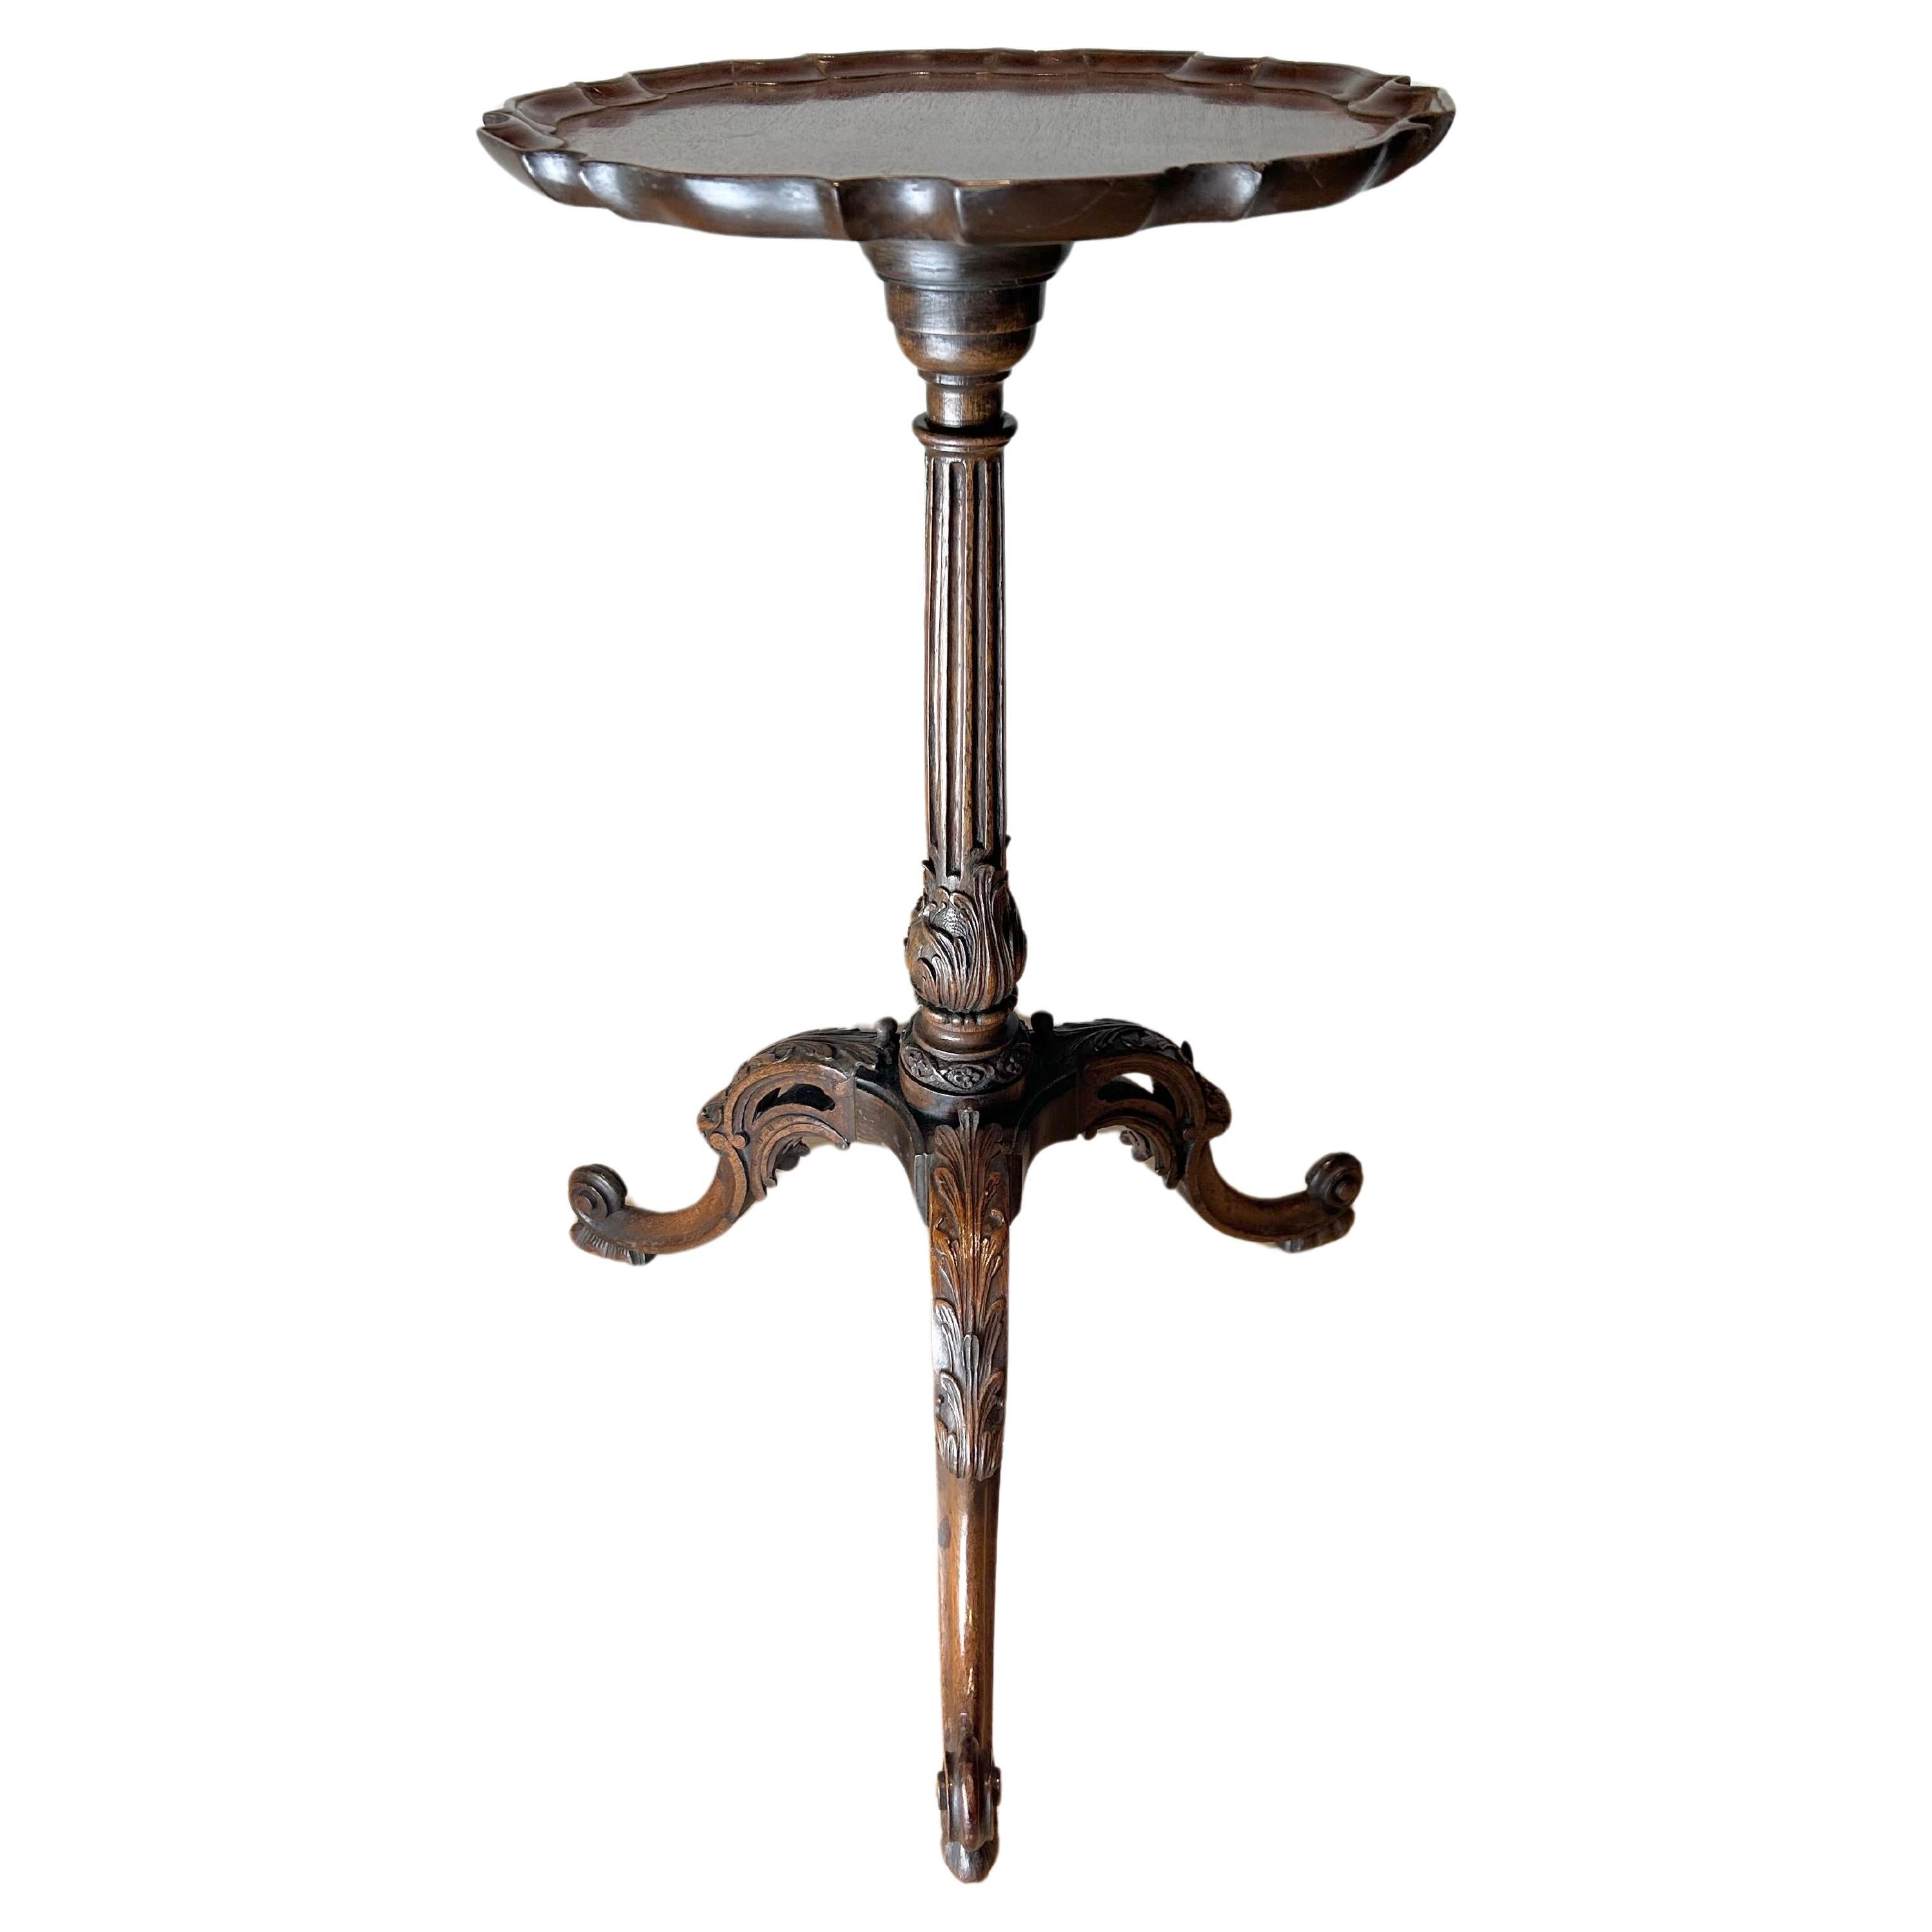 Antique English Chippendale style mahogany tripod/ wine table 19th century circa 1860 of wonderful quality, pie crust top sitting on a fine turned curved and fluted baluster column  on carved pierced rococo cabriole legs ending with elegant carved